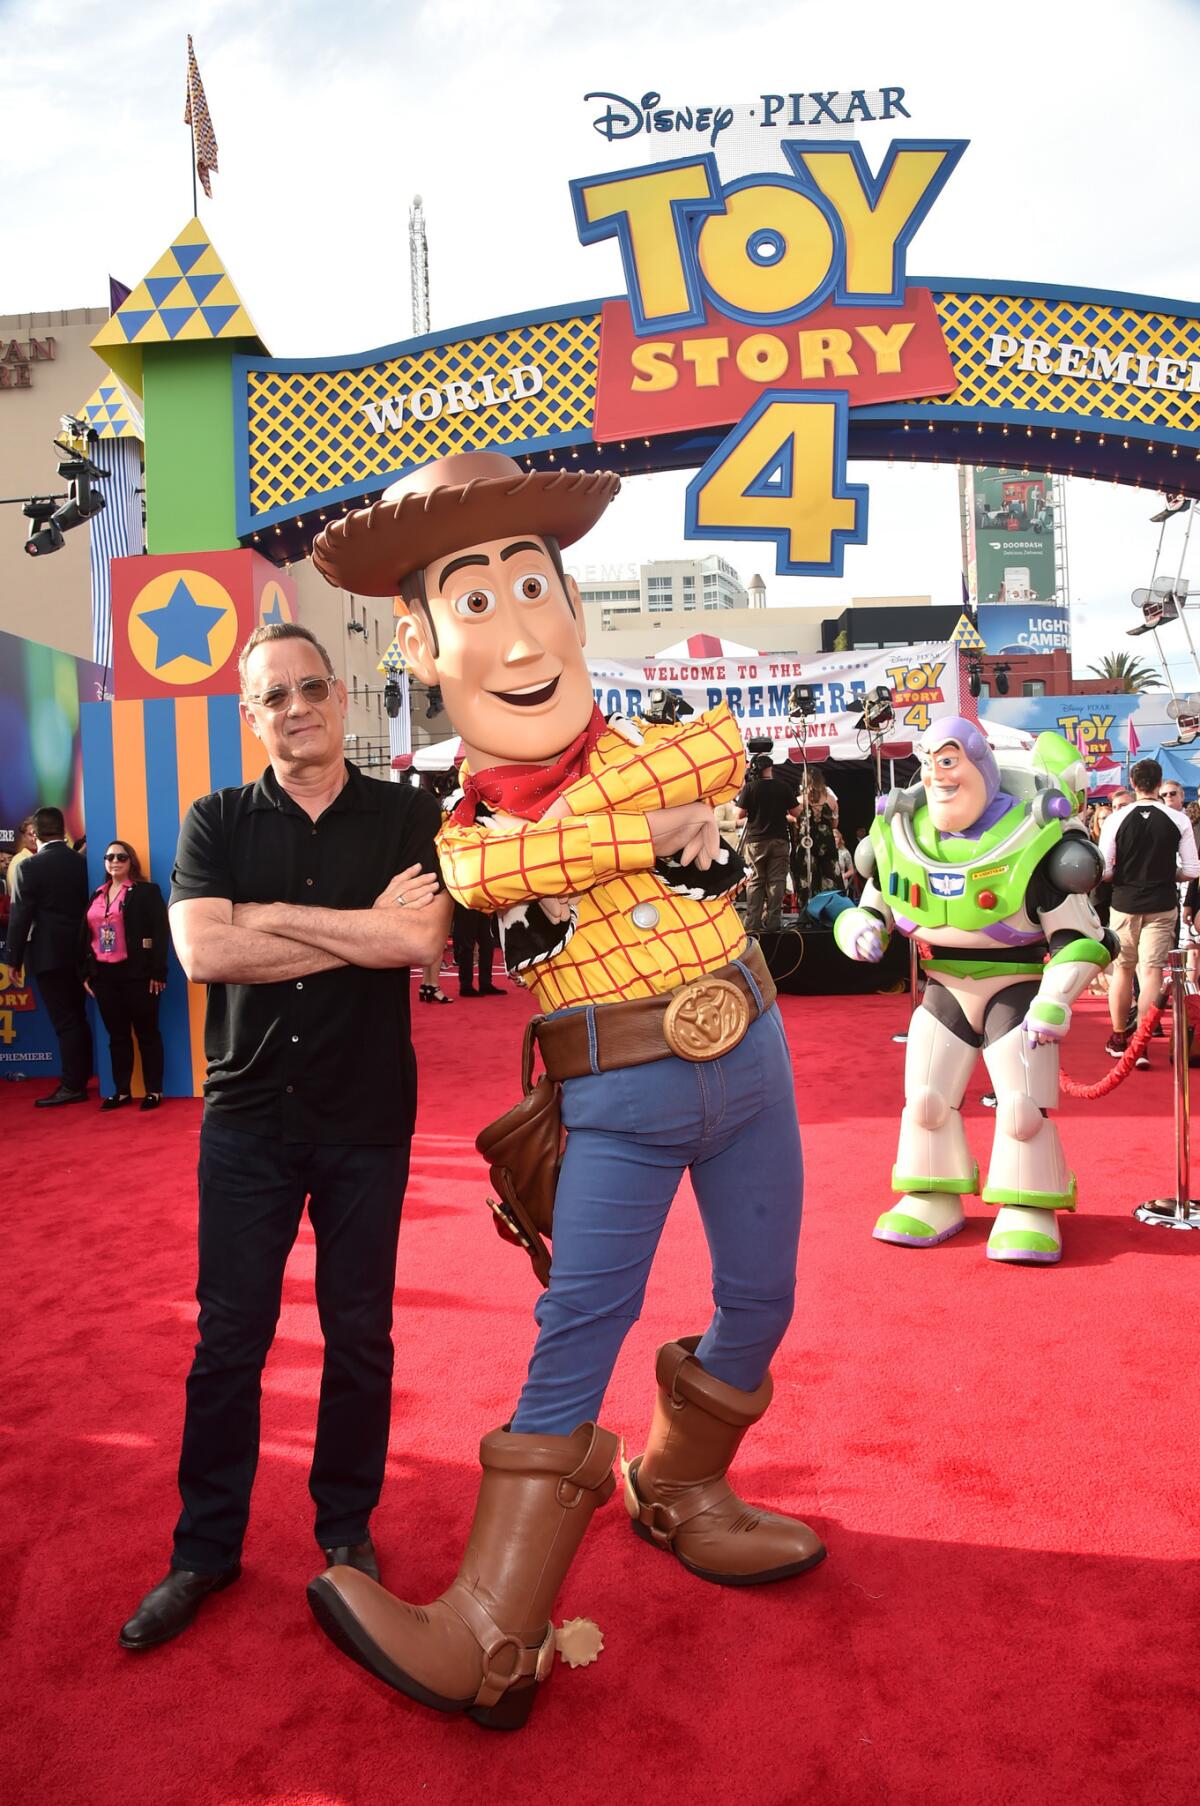 Tom Hanks poses with Woody at the premiere of "Toy Story 4"